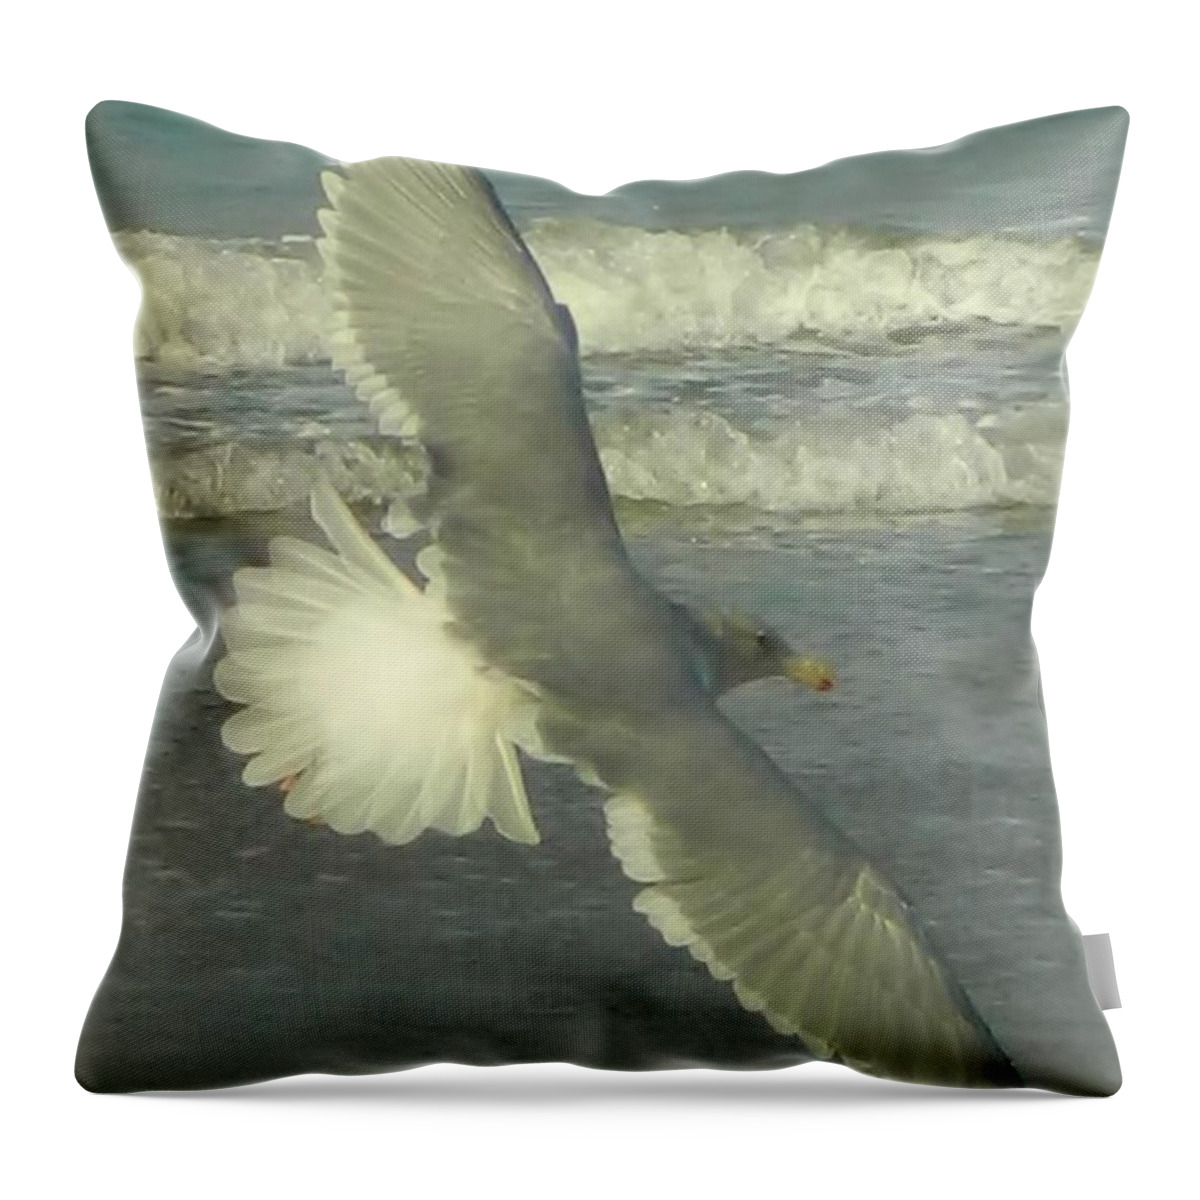 Seagulls Throw Pillow featuring the photograph Elegance by Gallery Of Hope 